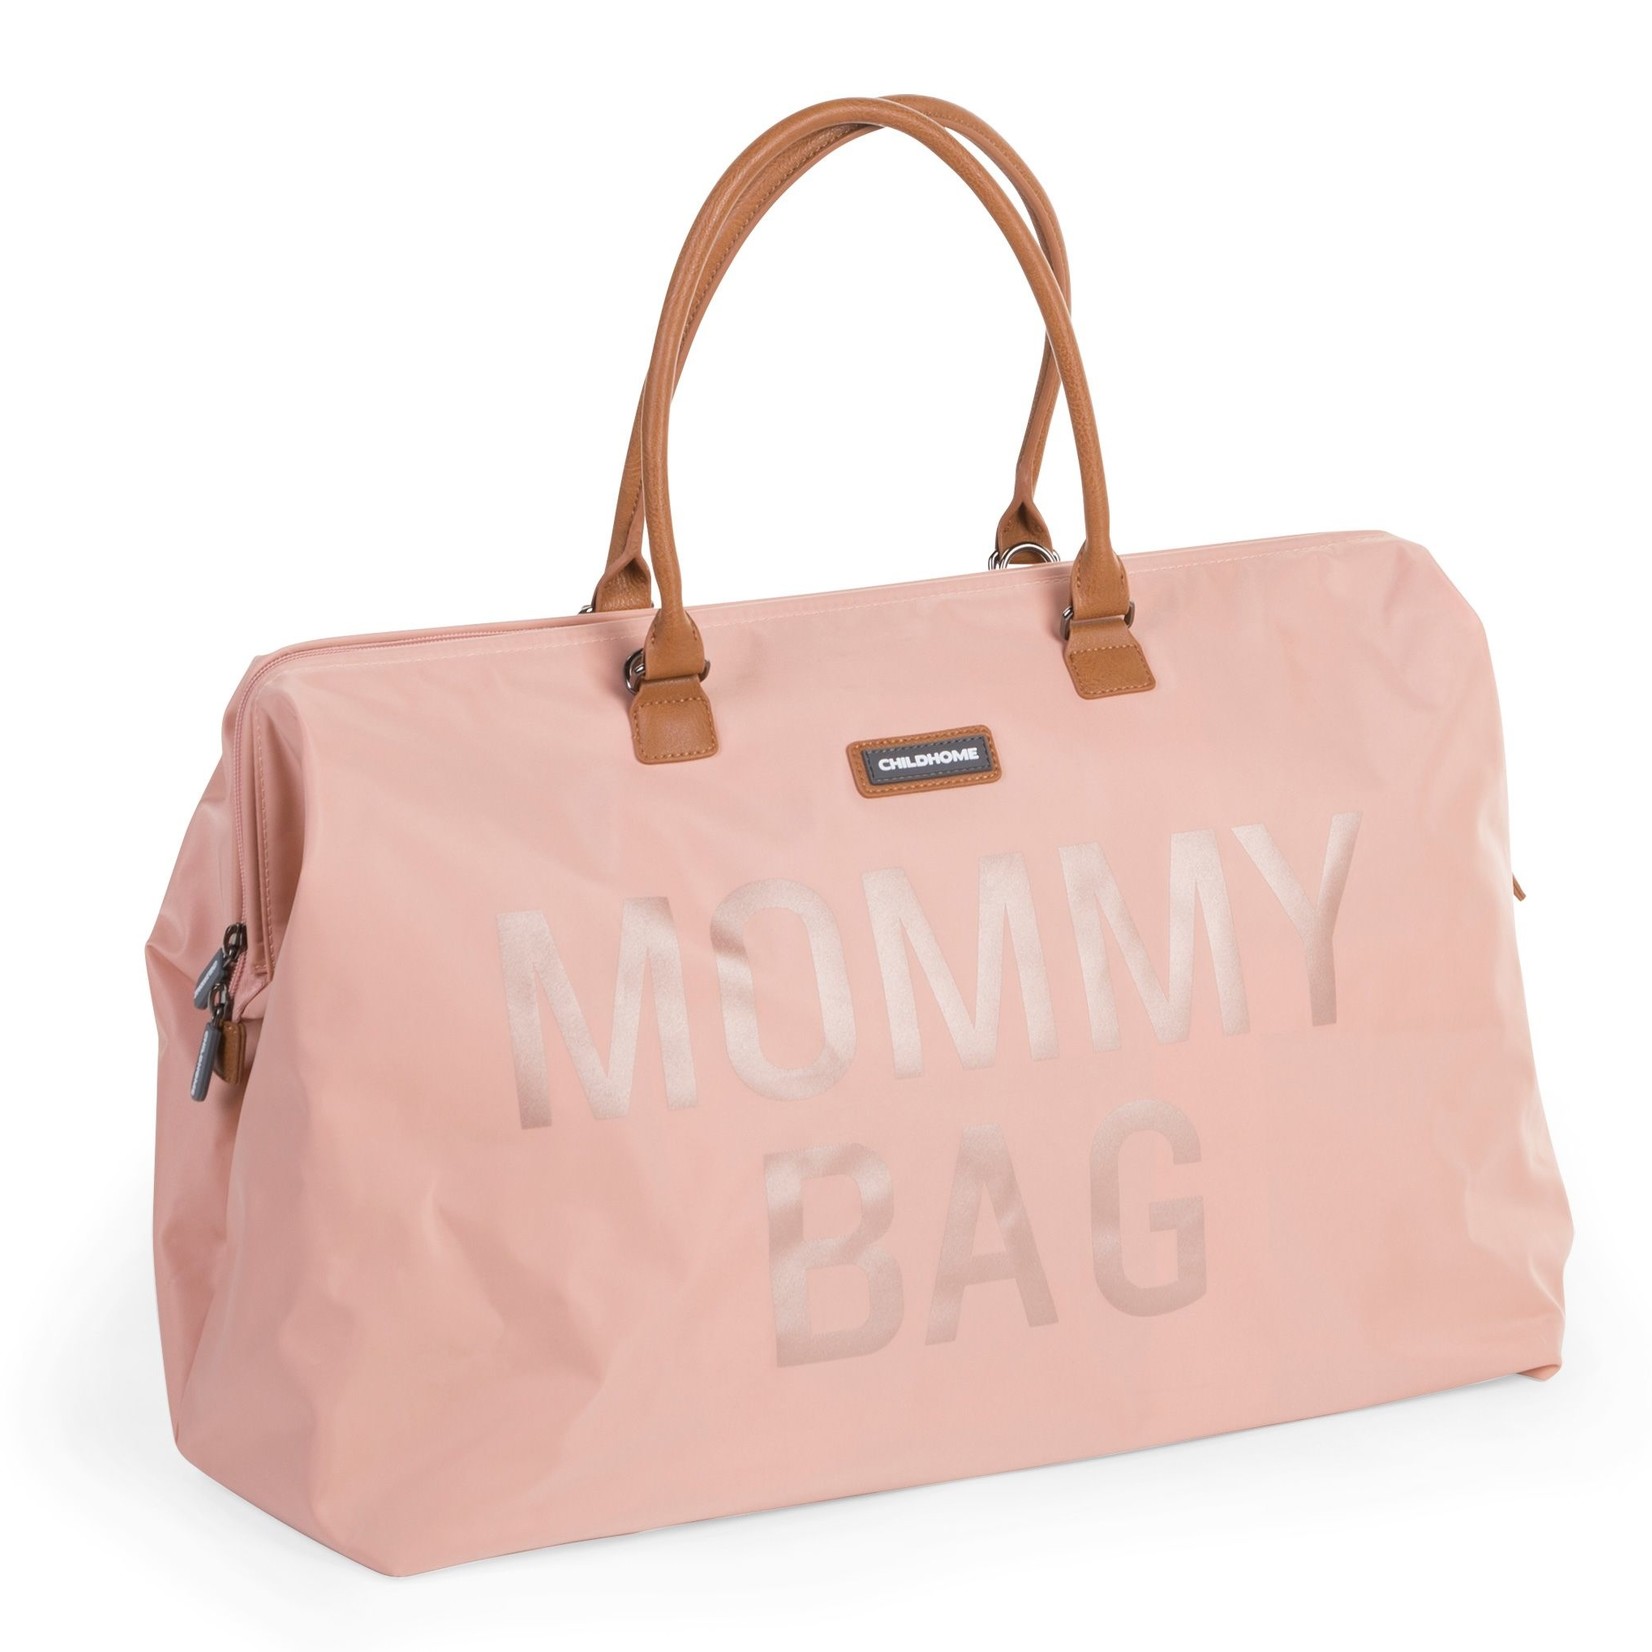 Childhome Mommy Bag Pink & Copper